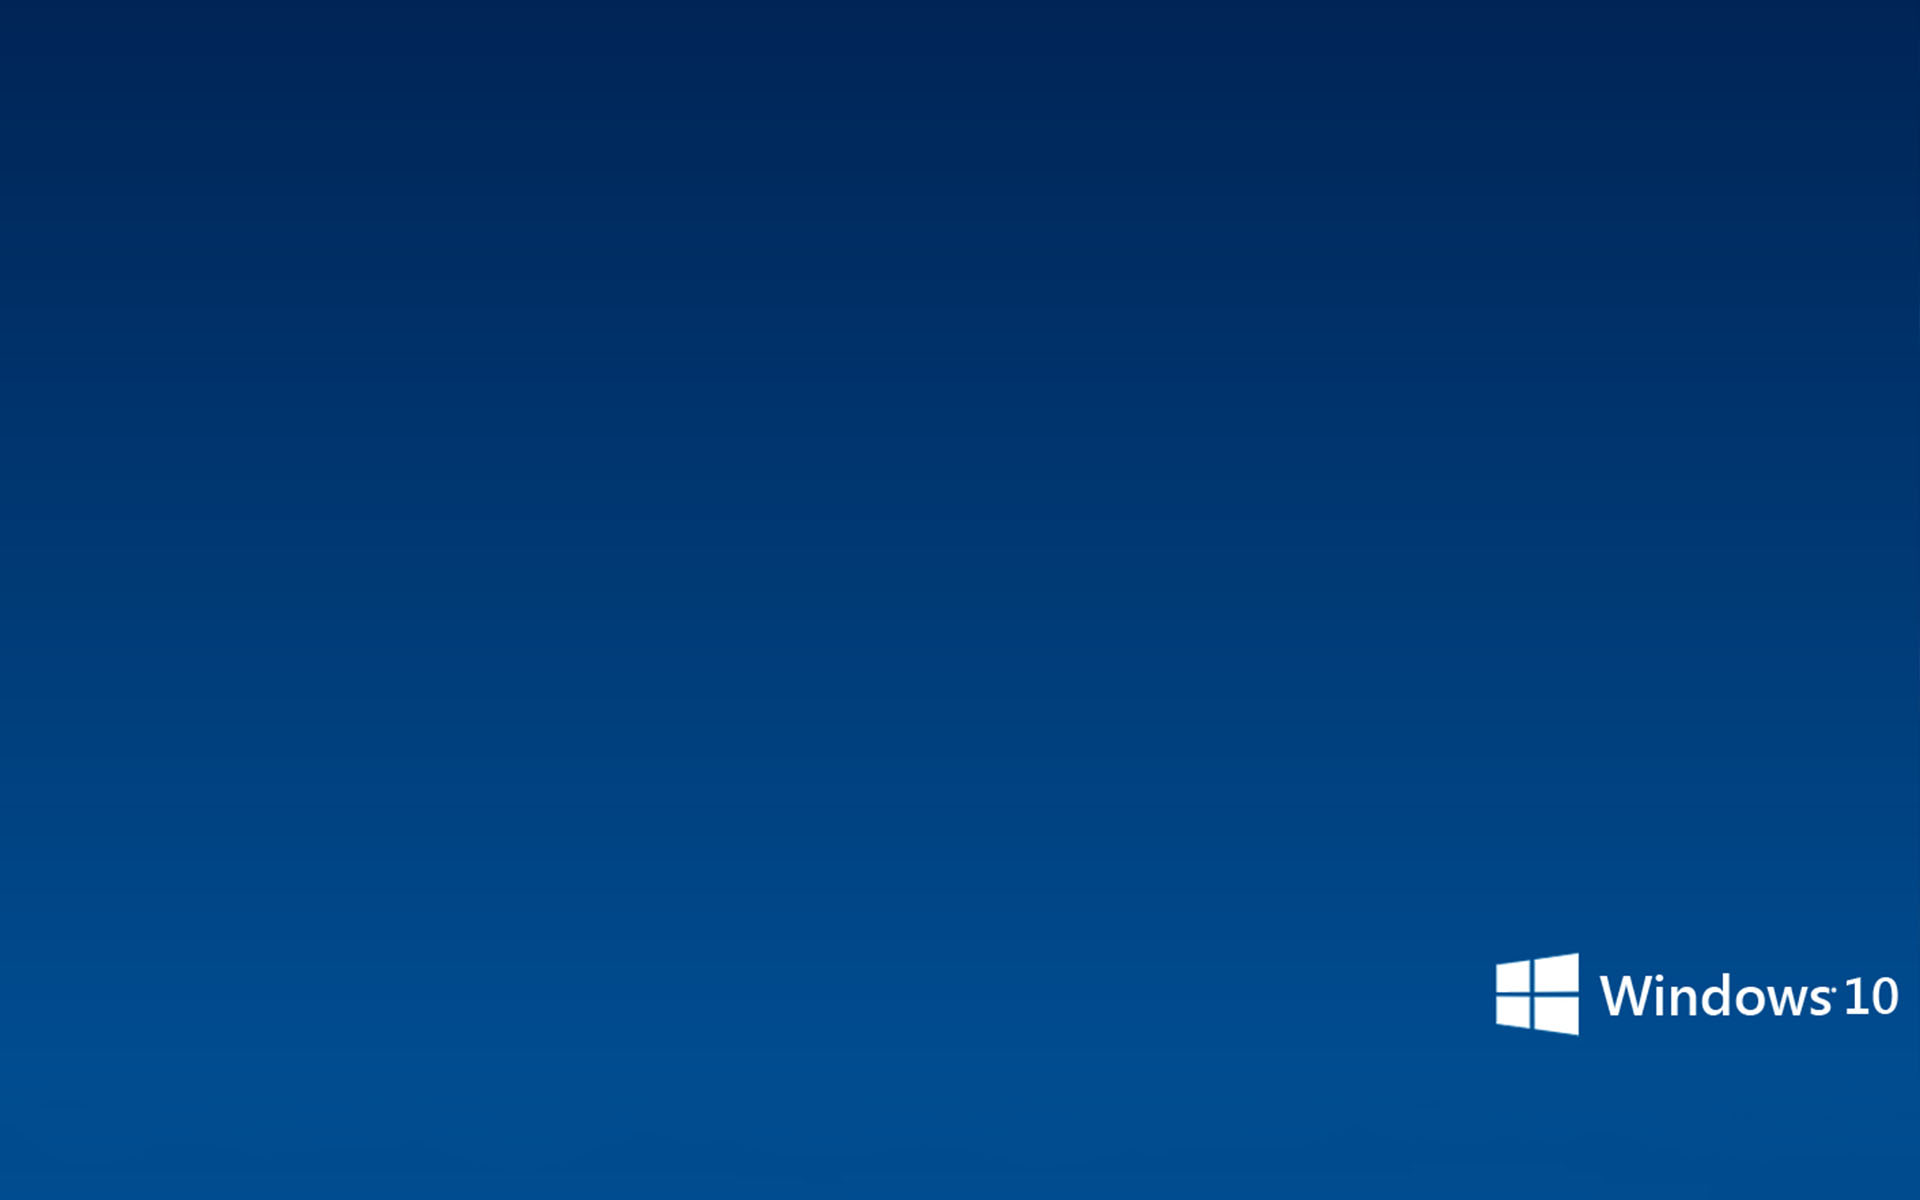 Free Download Simple Microsoft Windows 10 Wallpaper Wallpapers 19x10 For Your Desktop Mobile Tablet Explore 43 Windows 10 Video Wallpaper Desktop Wallpaper For Windows 10 Live Wallpaper Windows 10 New Windows 10 Wallpaper